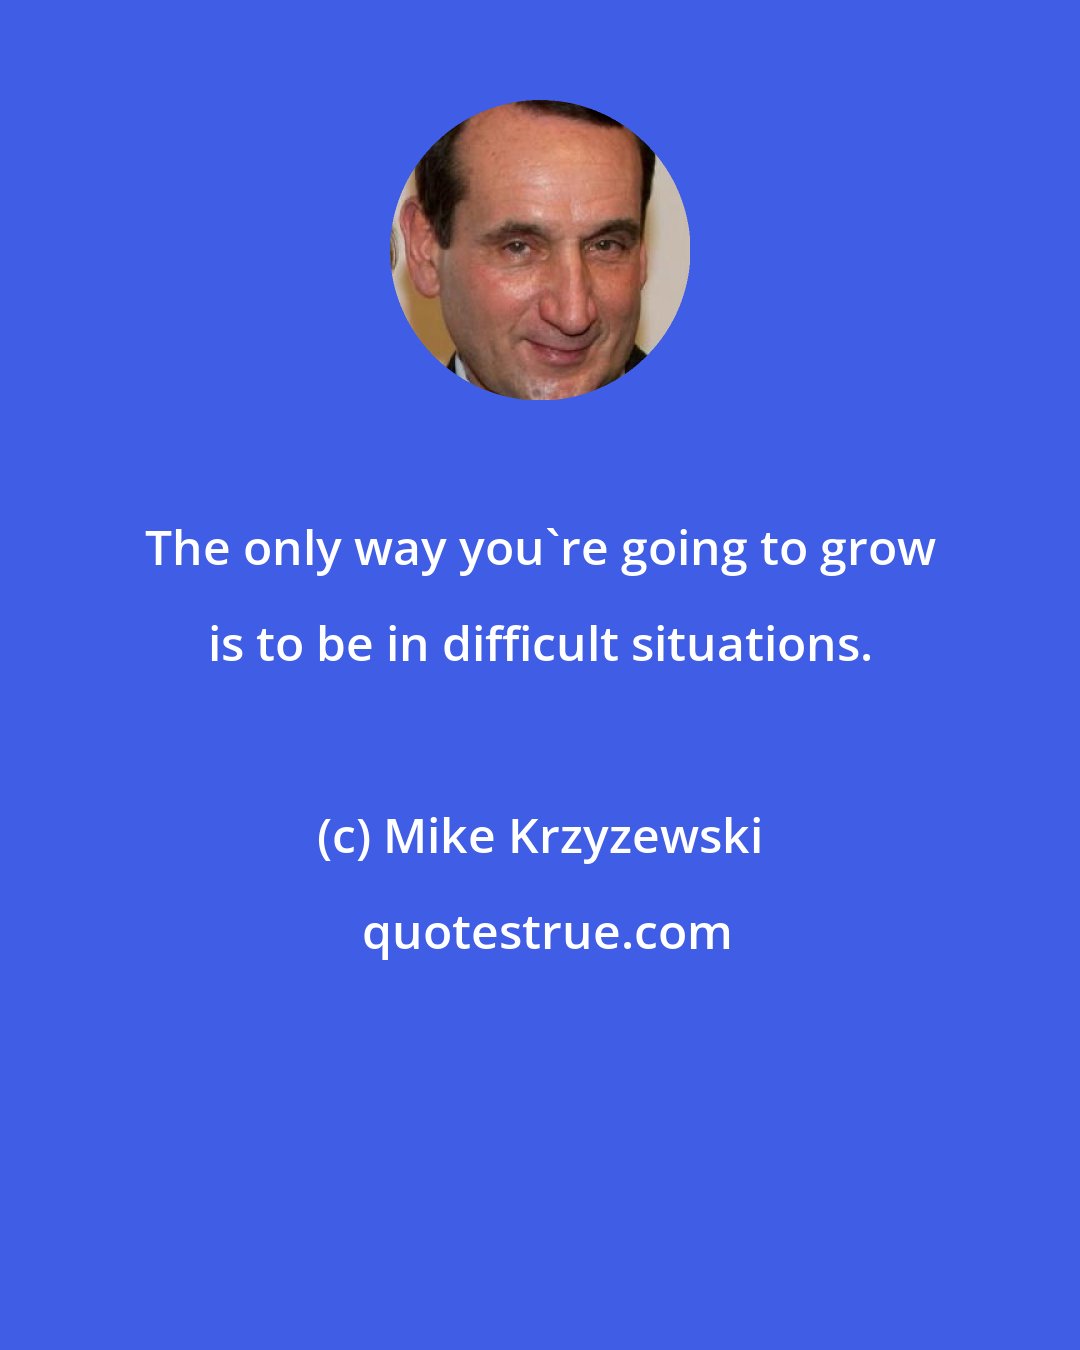 Mike Krzyzewski: The only way you're going to grow is to be in difficult situations.